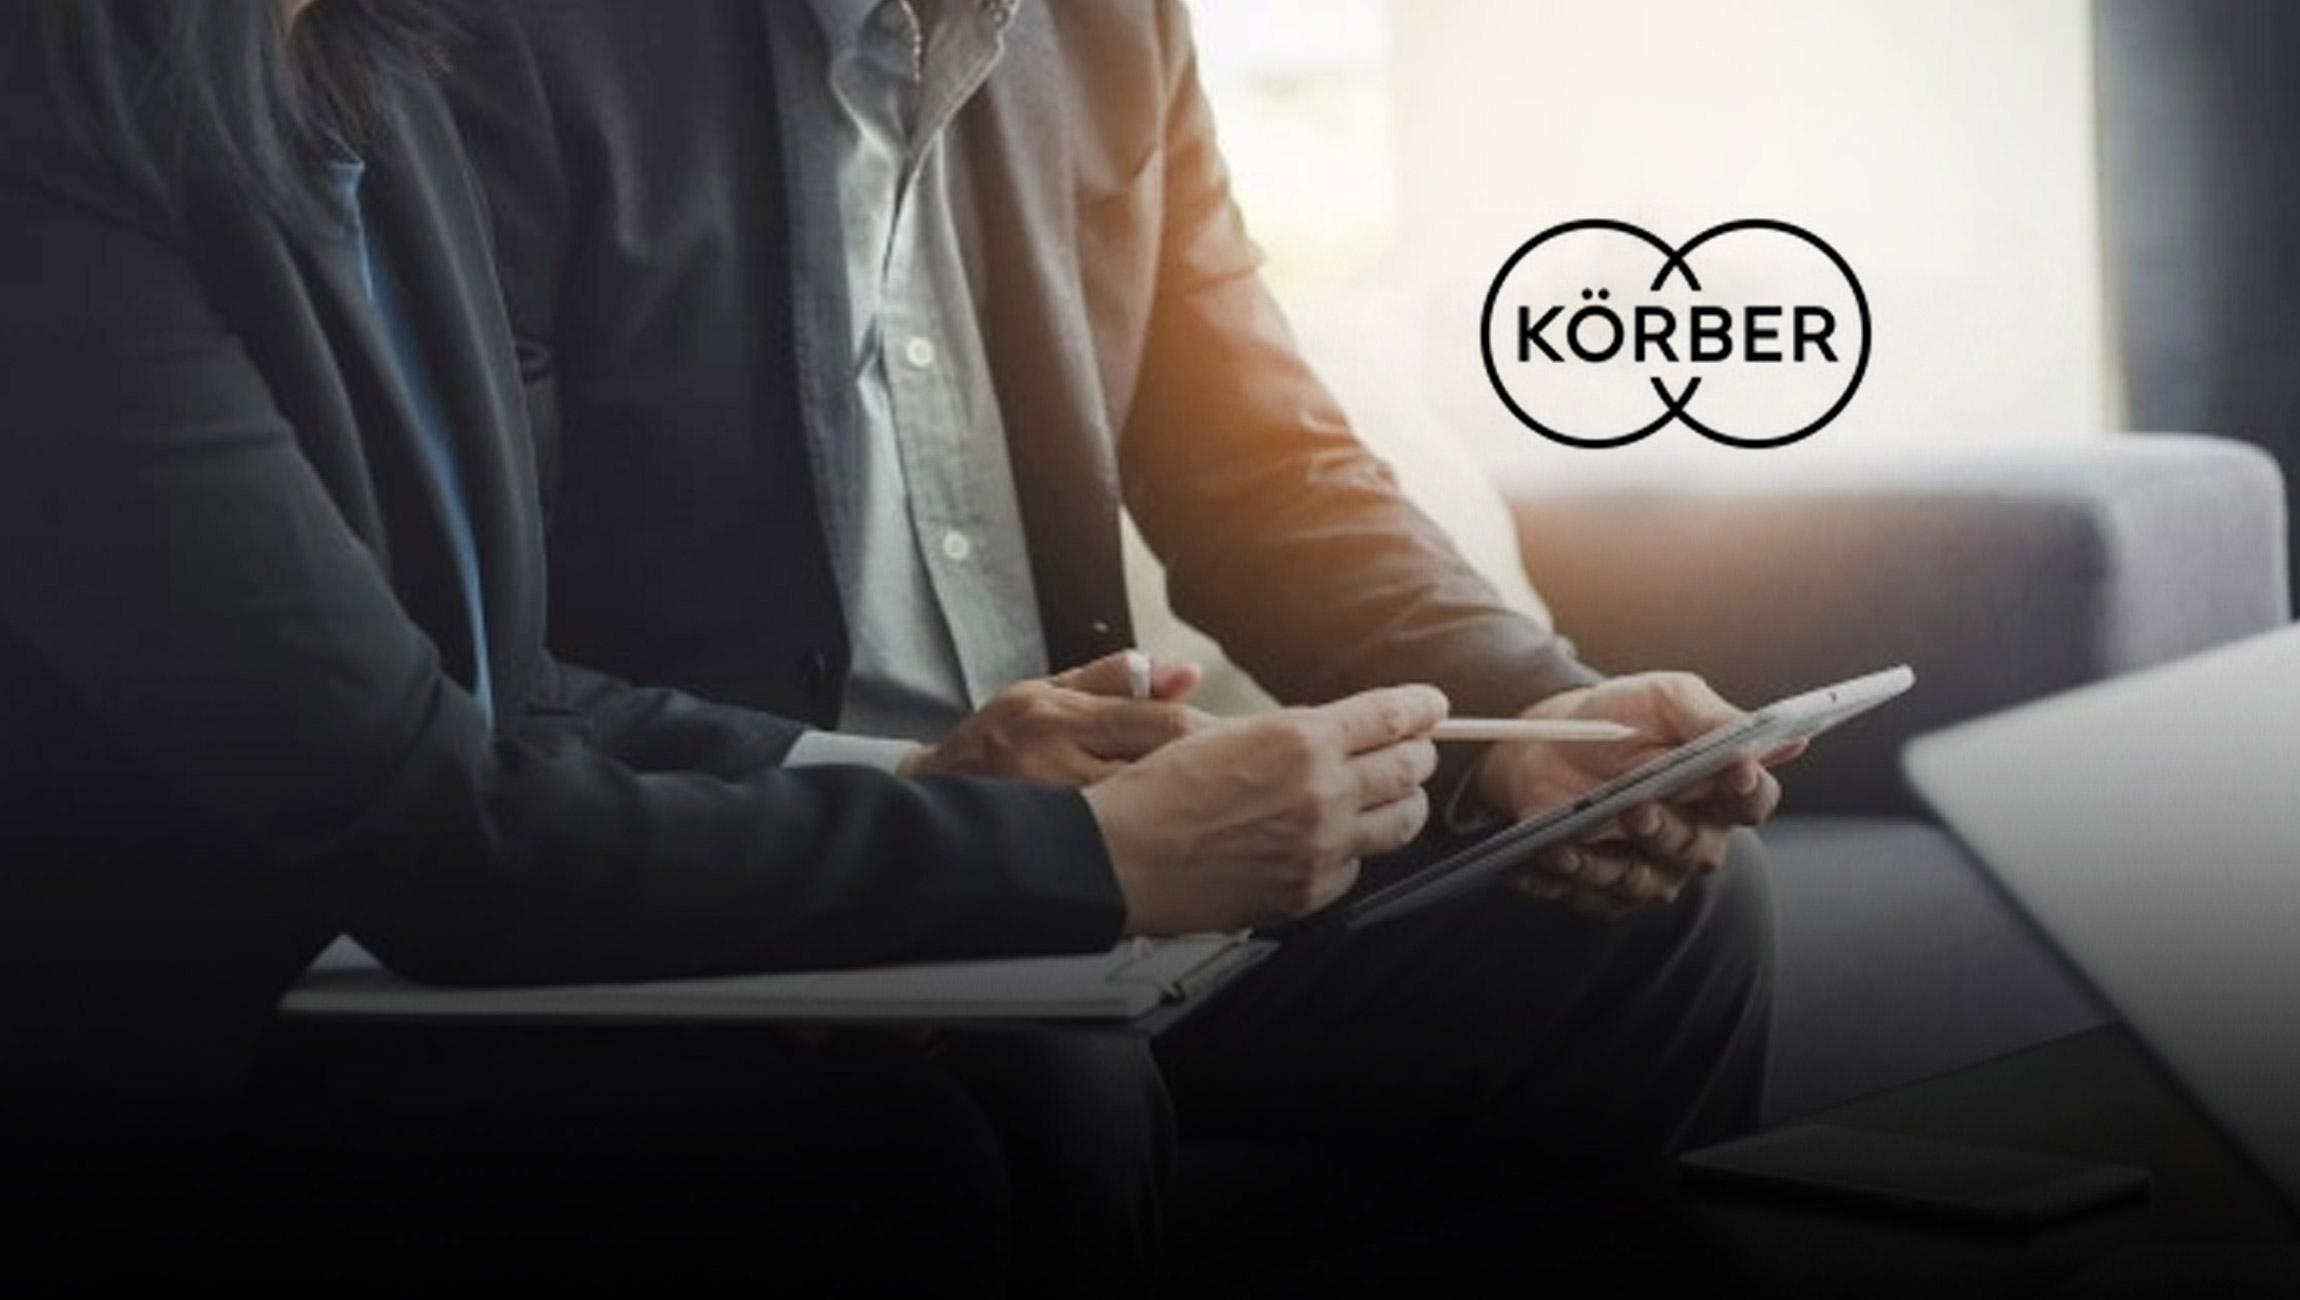 Körber unveils unrivalled supply chain solution portfolio and strategy at Elevate EMEA 2021